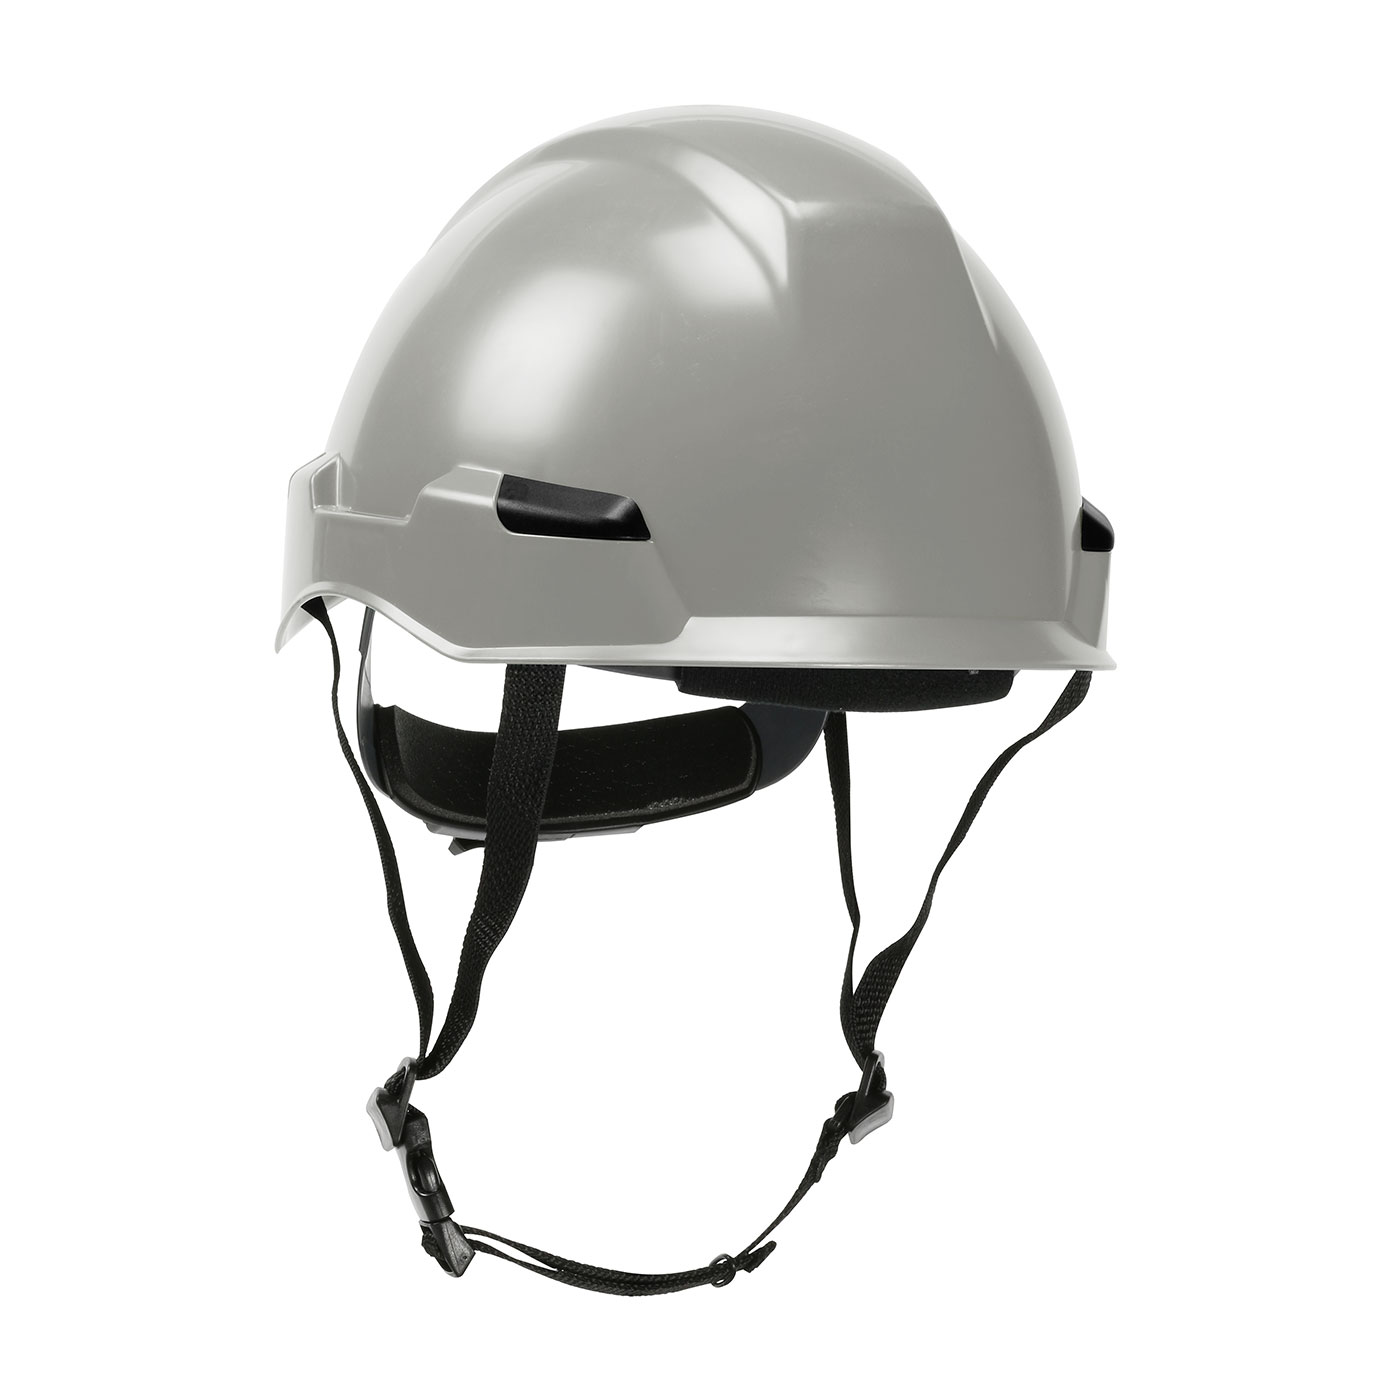 280-HP141R PIP® Dynamic Rocky™ Industrial Climbing Helmet with Polycarbonate / ABS Shell, Nylon Suspension, Wheel Ratchet Adjustment and 4-Point Chin Strap- Gray